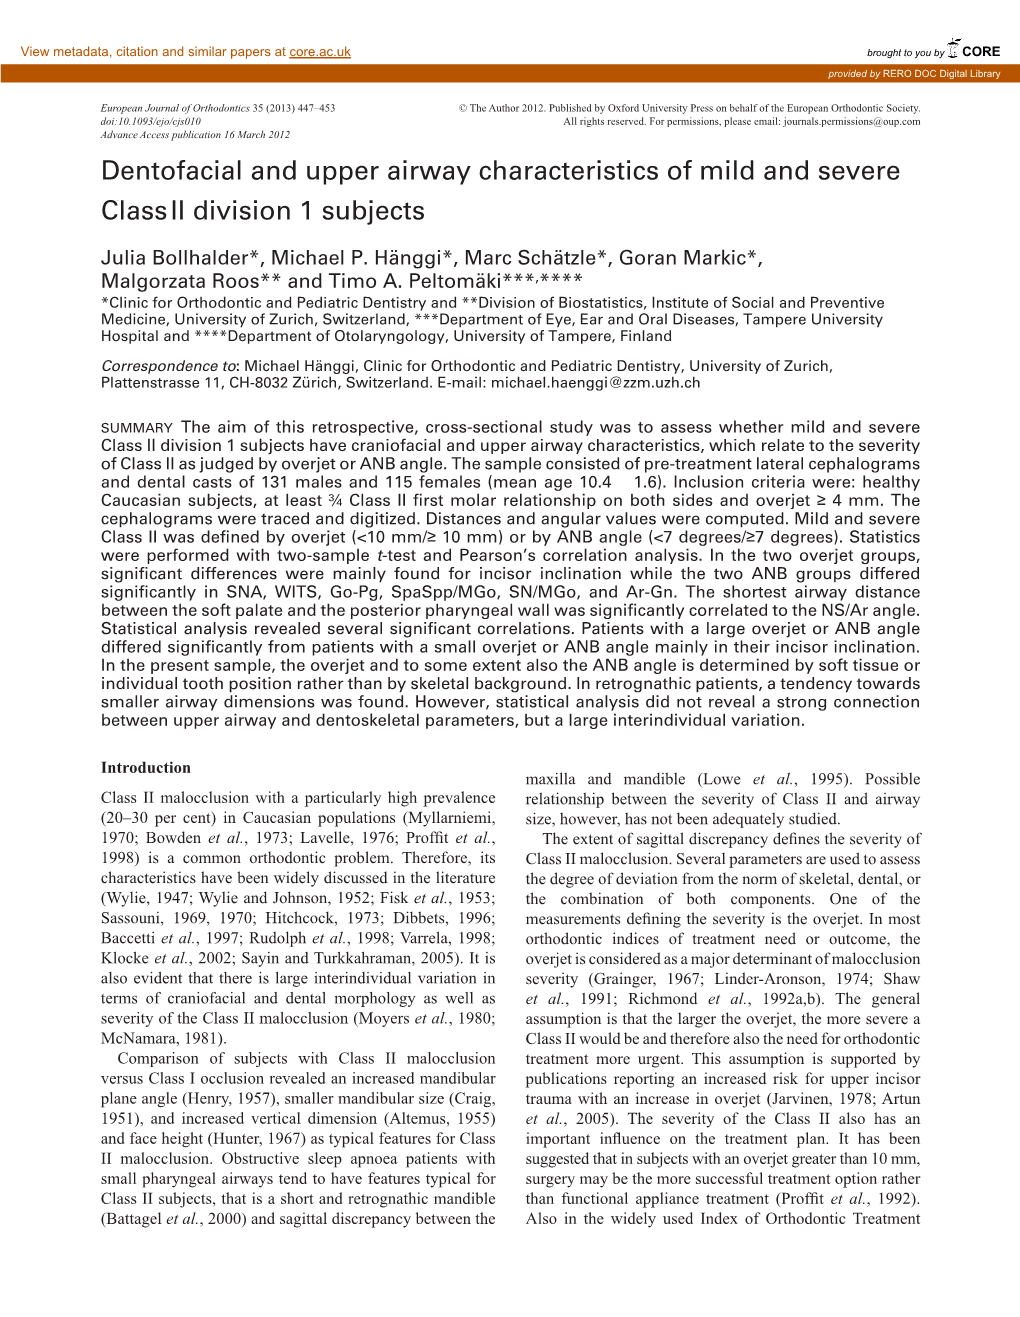 Dentofacial and Upper Airway Characteristics of Mild and Severe Classclass II Division 1 Subjects